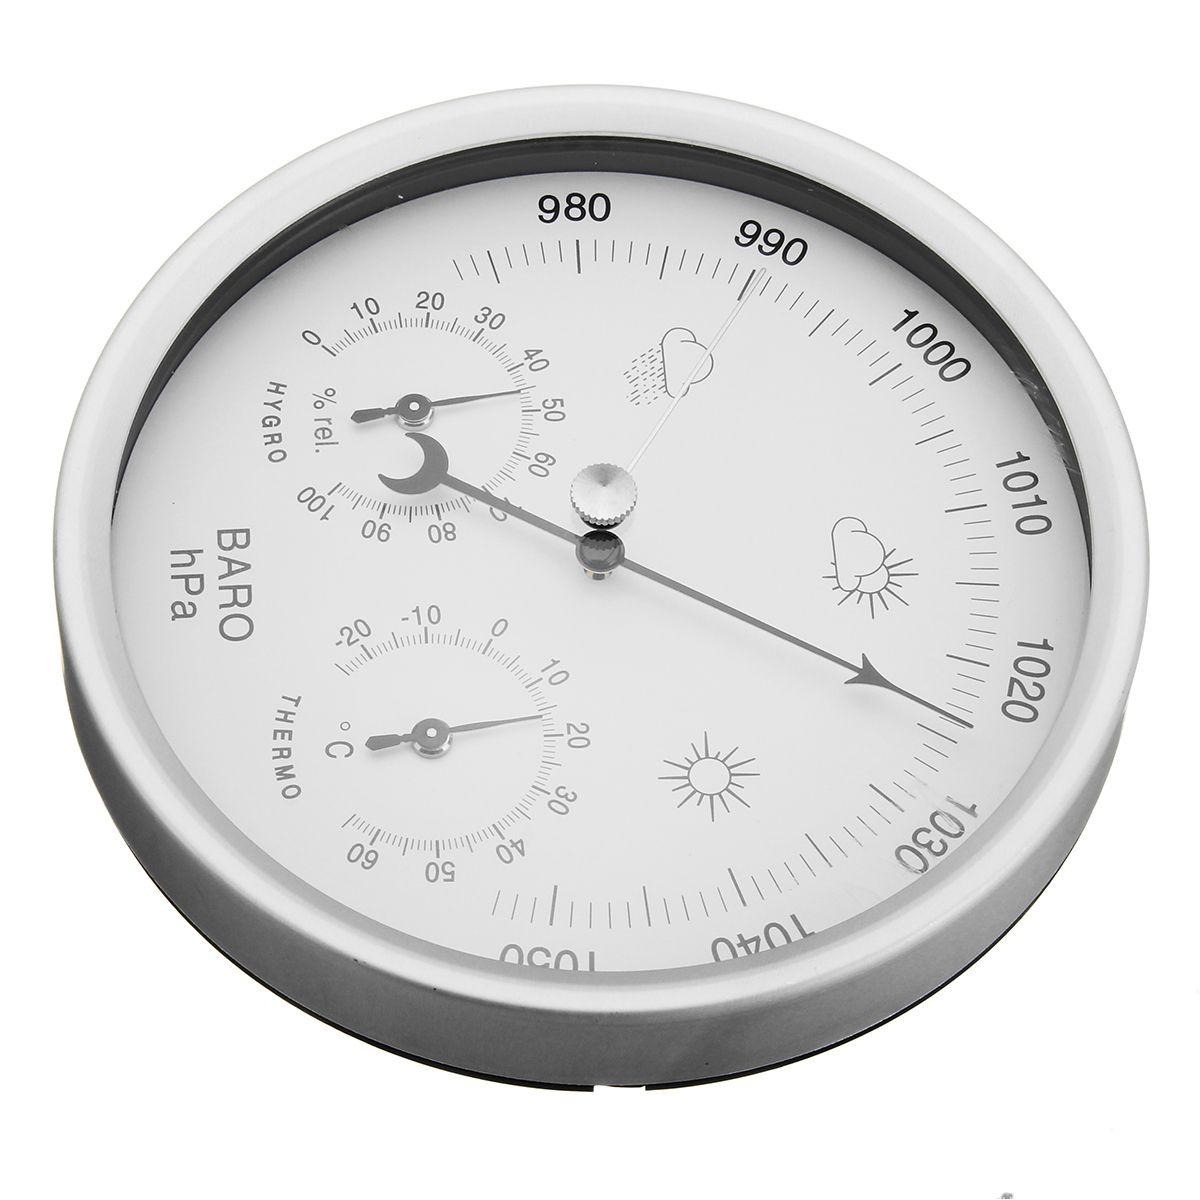 3-IN-1-Wall-Hanging-Weather-Thermometer-Barometer-Hygrometer-Home-Decor-132MM-1262804